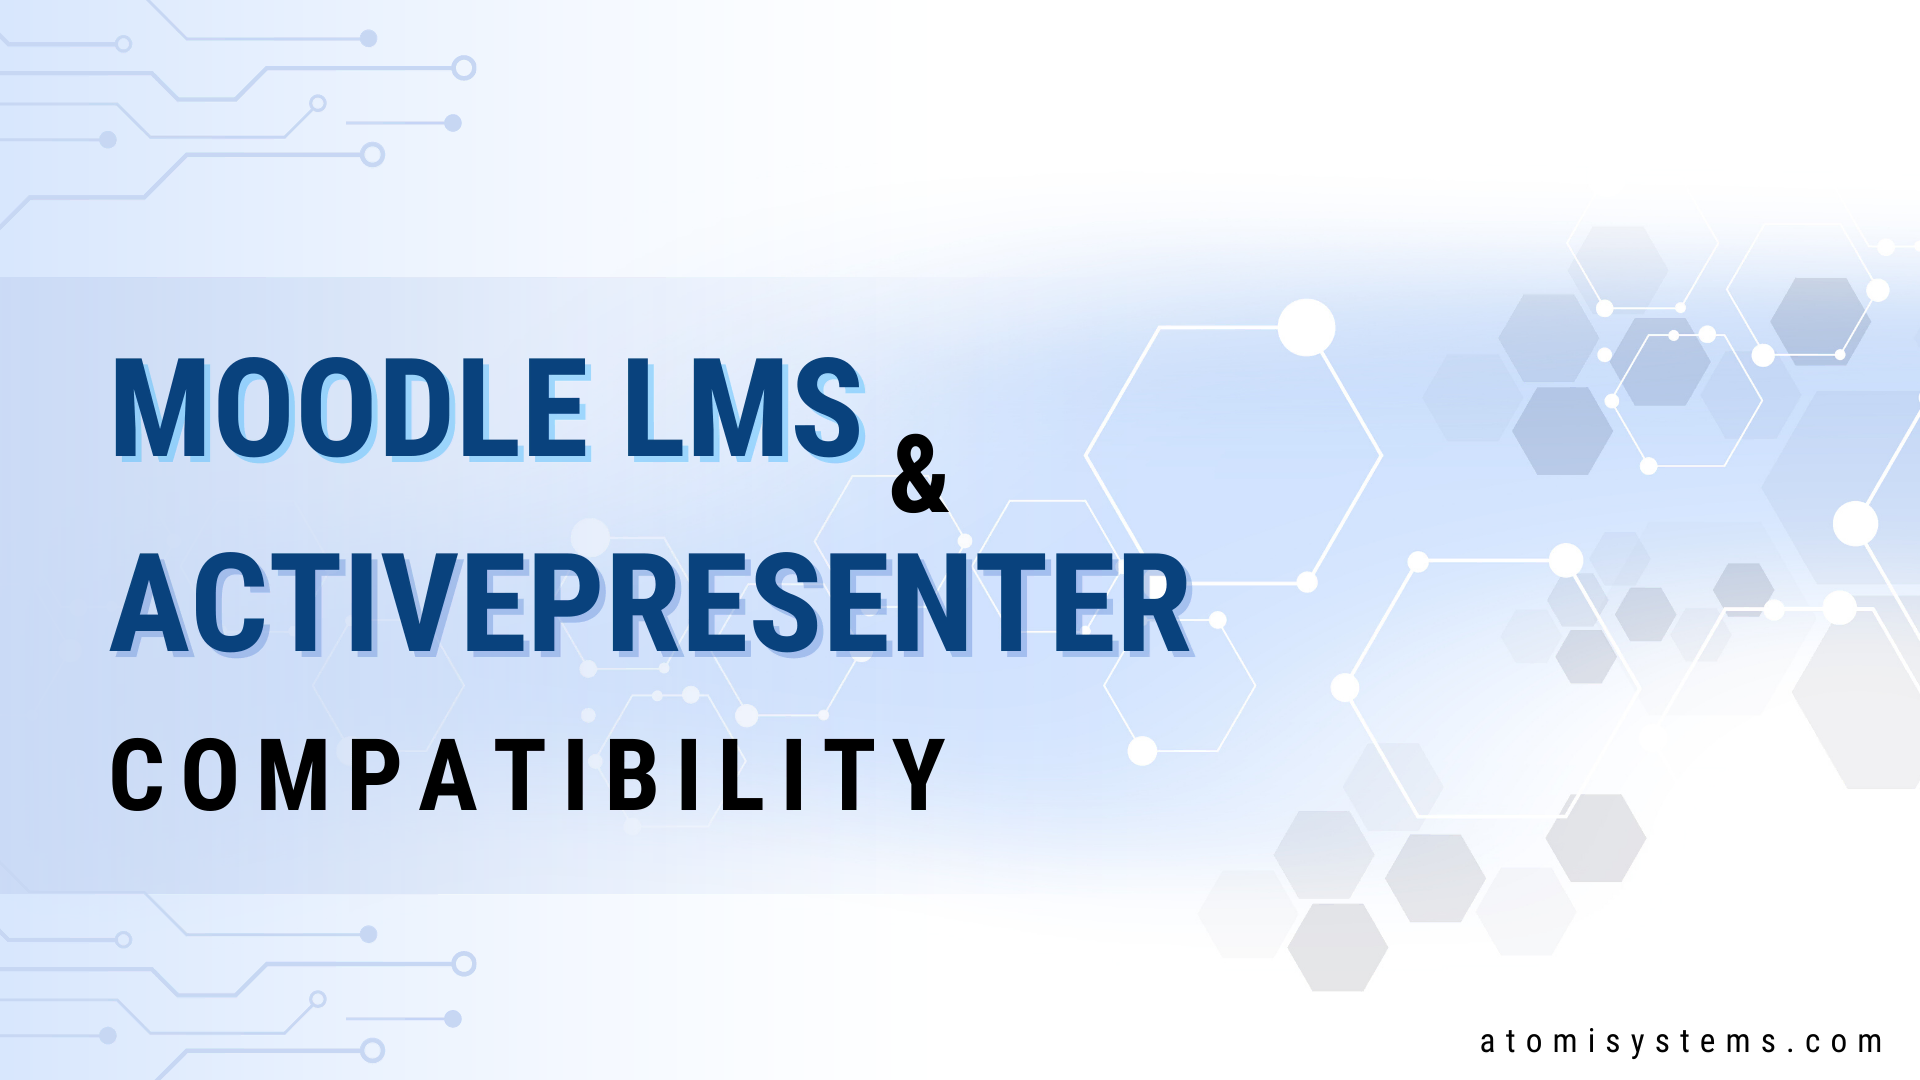 Moodle LMS and ActivePresenter compatibility